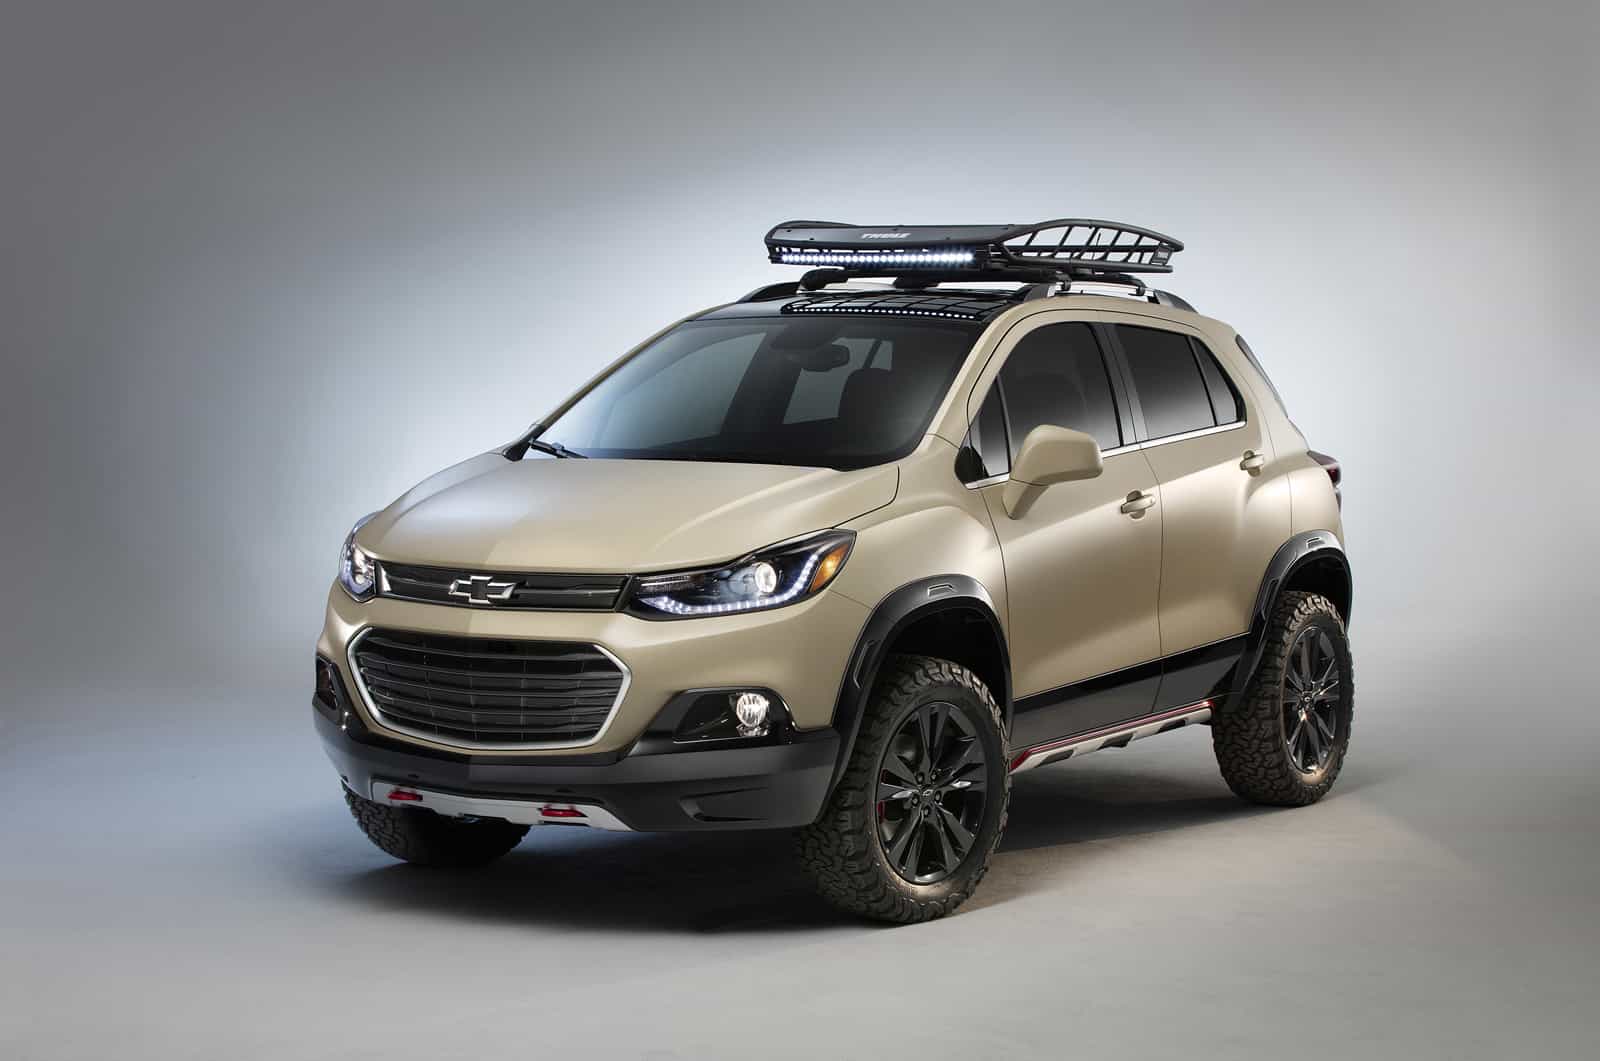 Meet the Trax Activ concept – a small SUV aimed right at the heart of active adventure seekers. It showcases a unique Satin Sandstorm exterior and added functionality inside and out to conquer new roads.